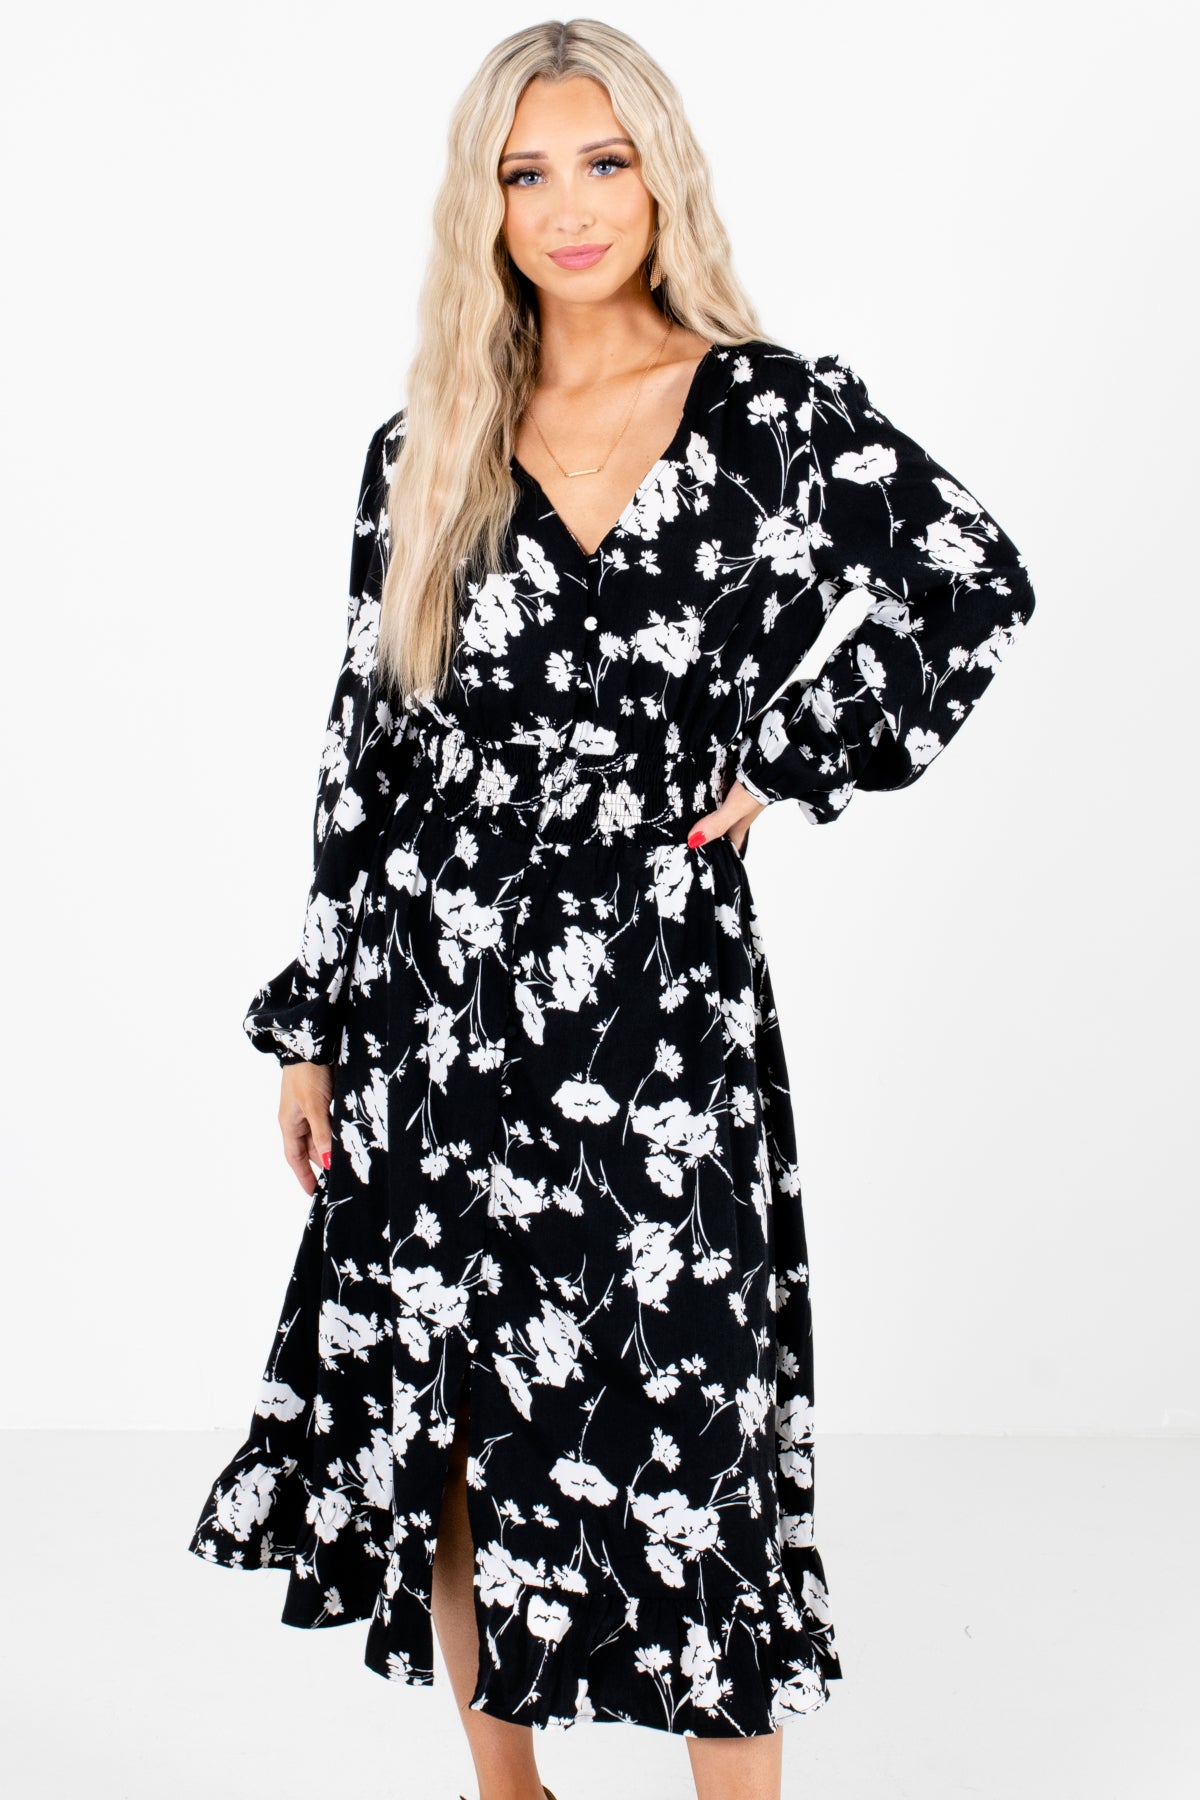 Black and White Floral Patterned Boutique Midi Dresses for Women